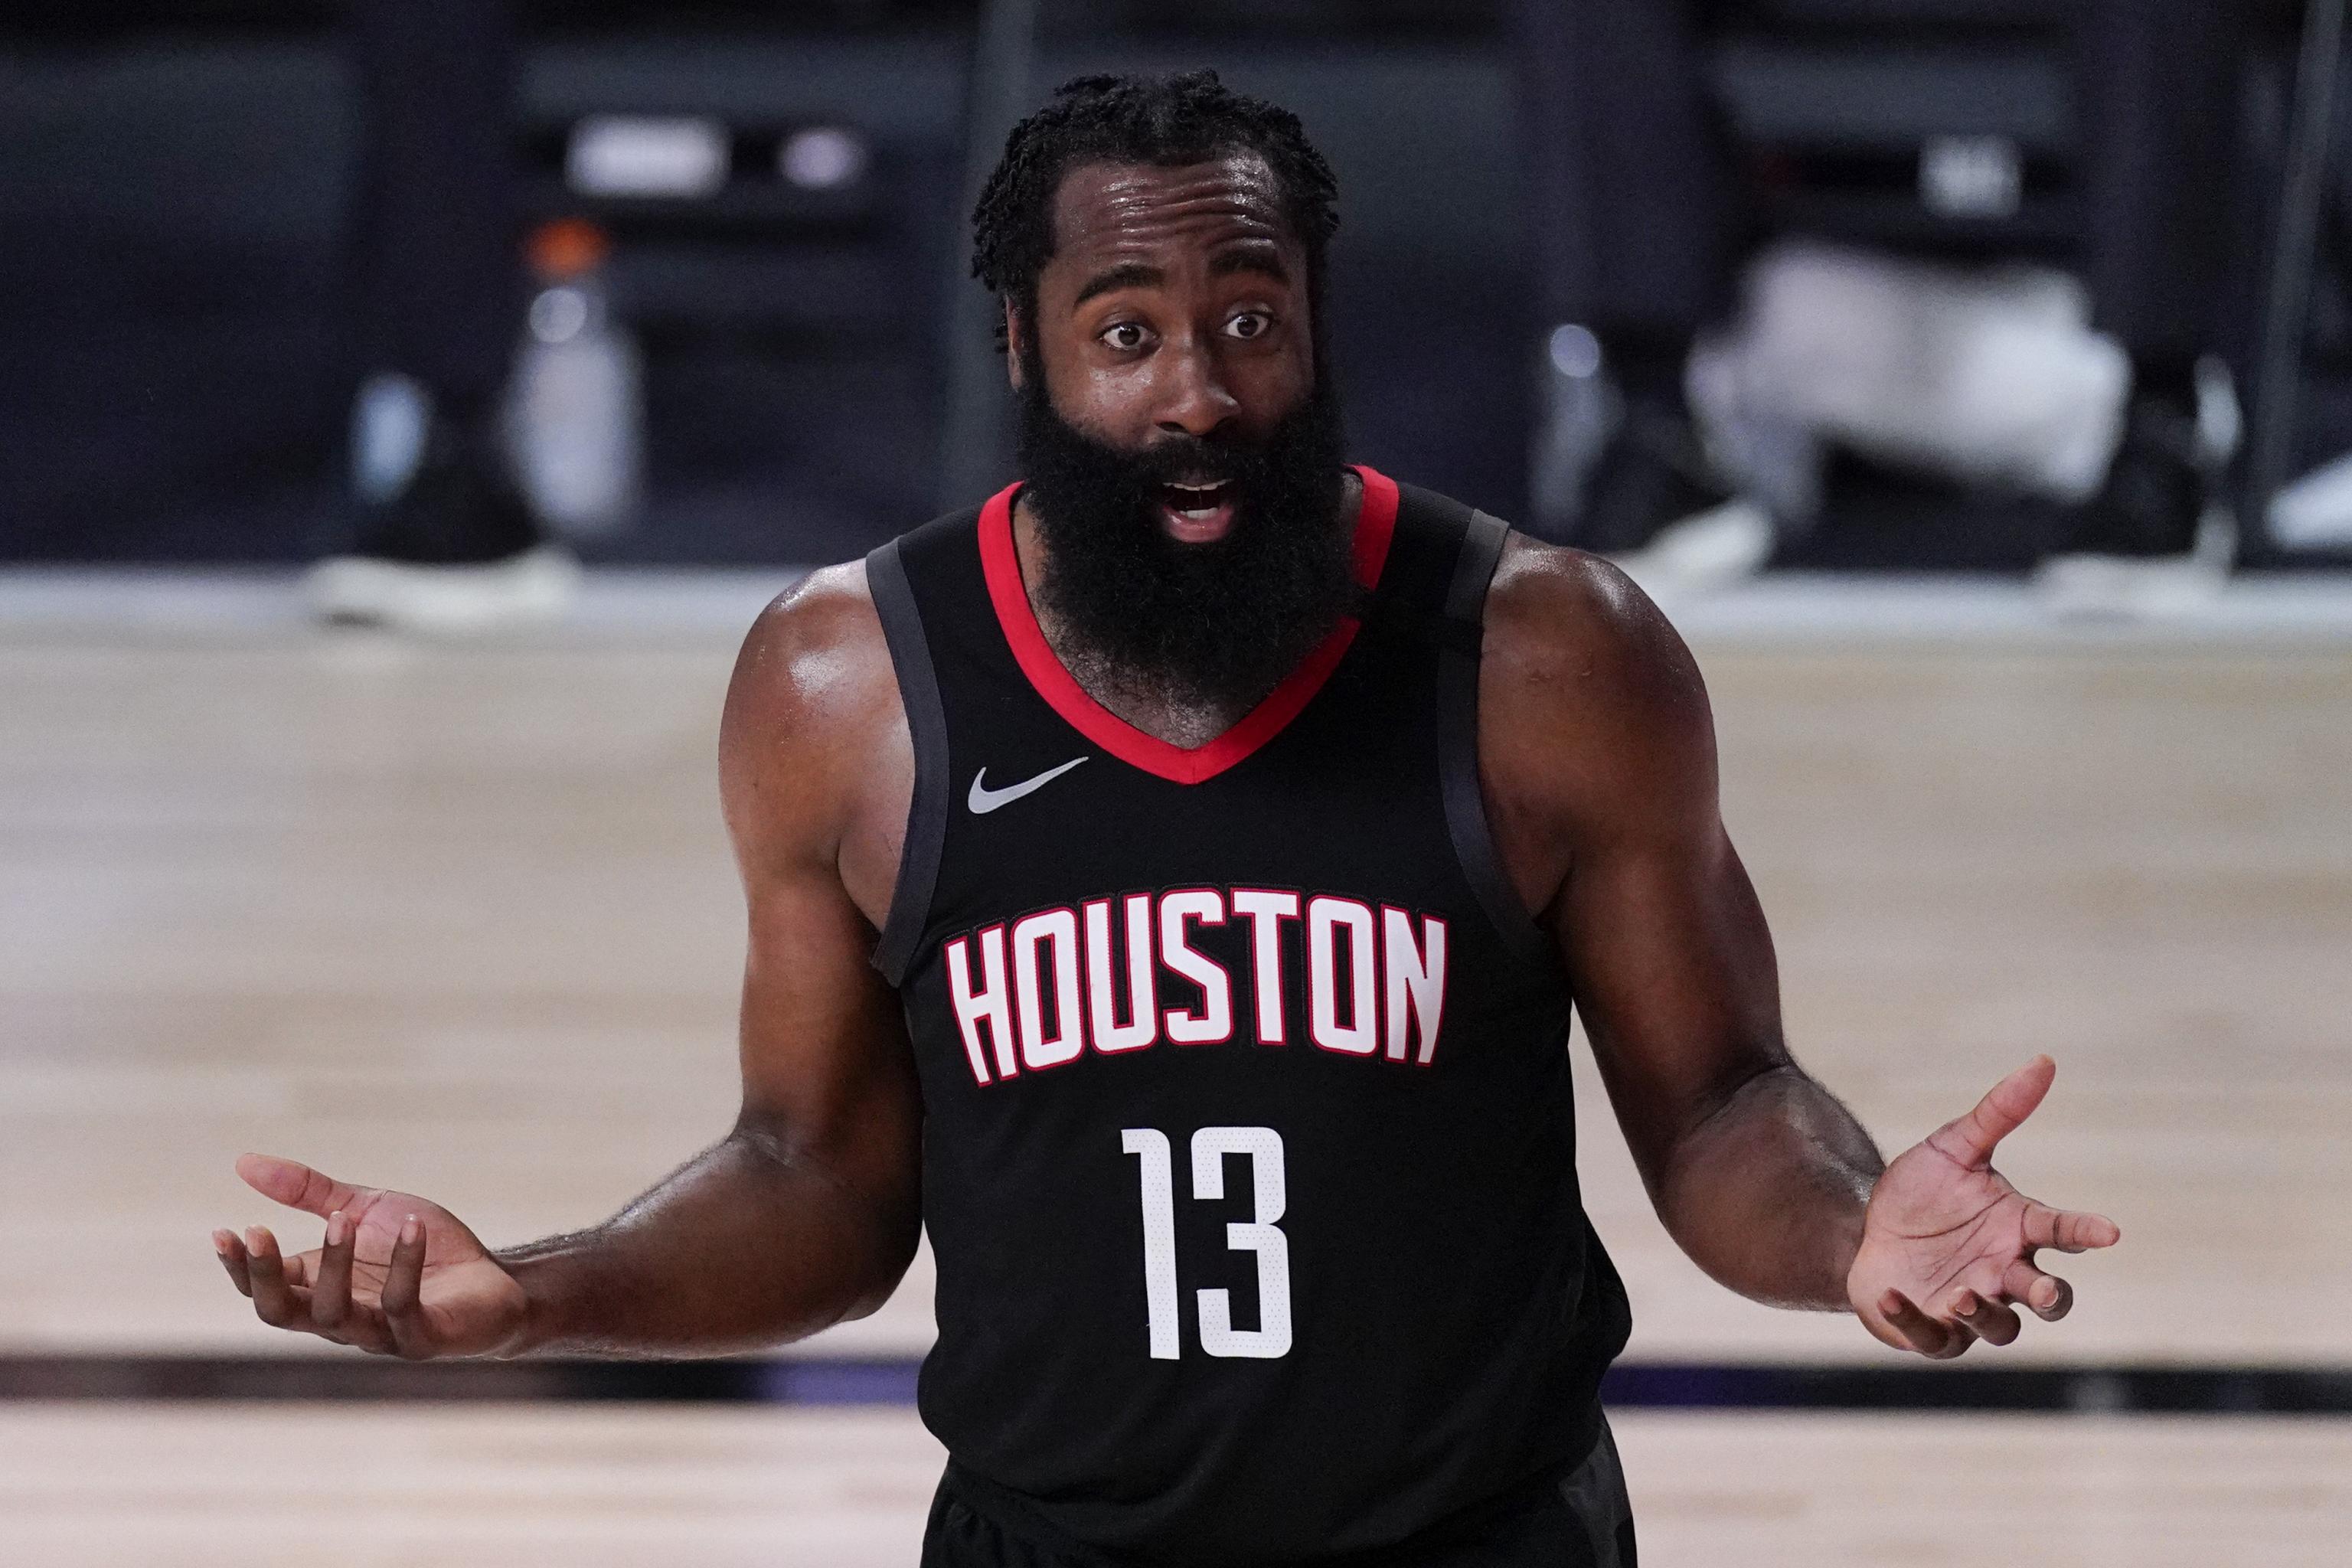 You're Gonna See a Lot of Swag”: James Harden on the New Houston